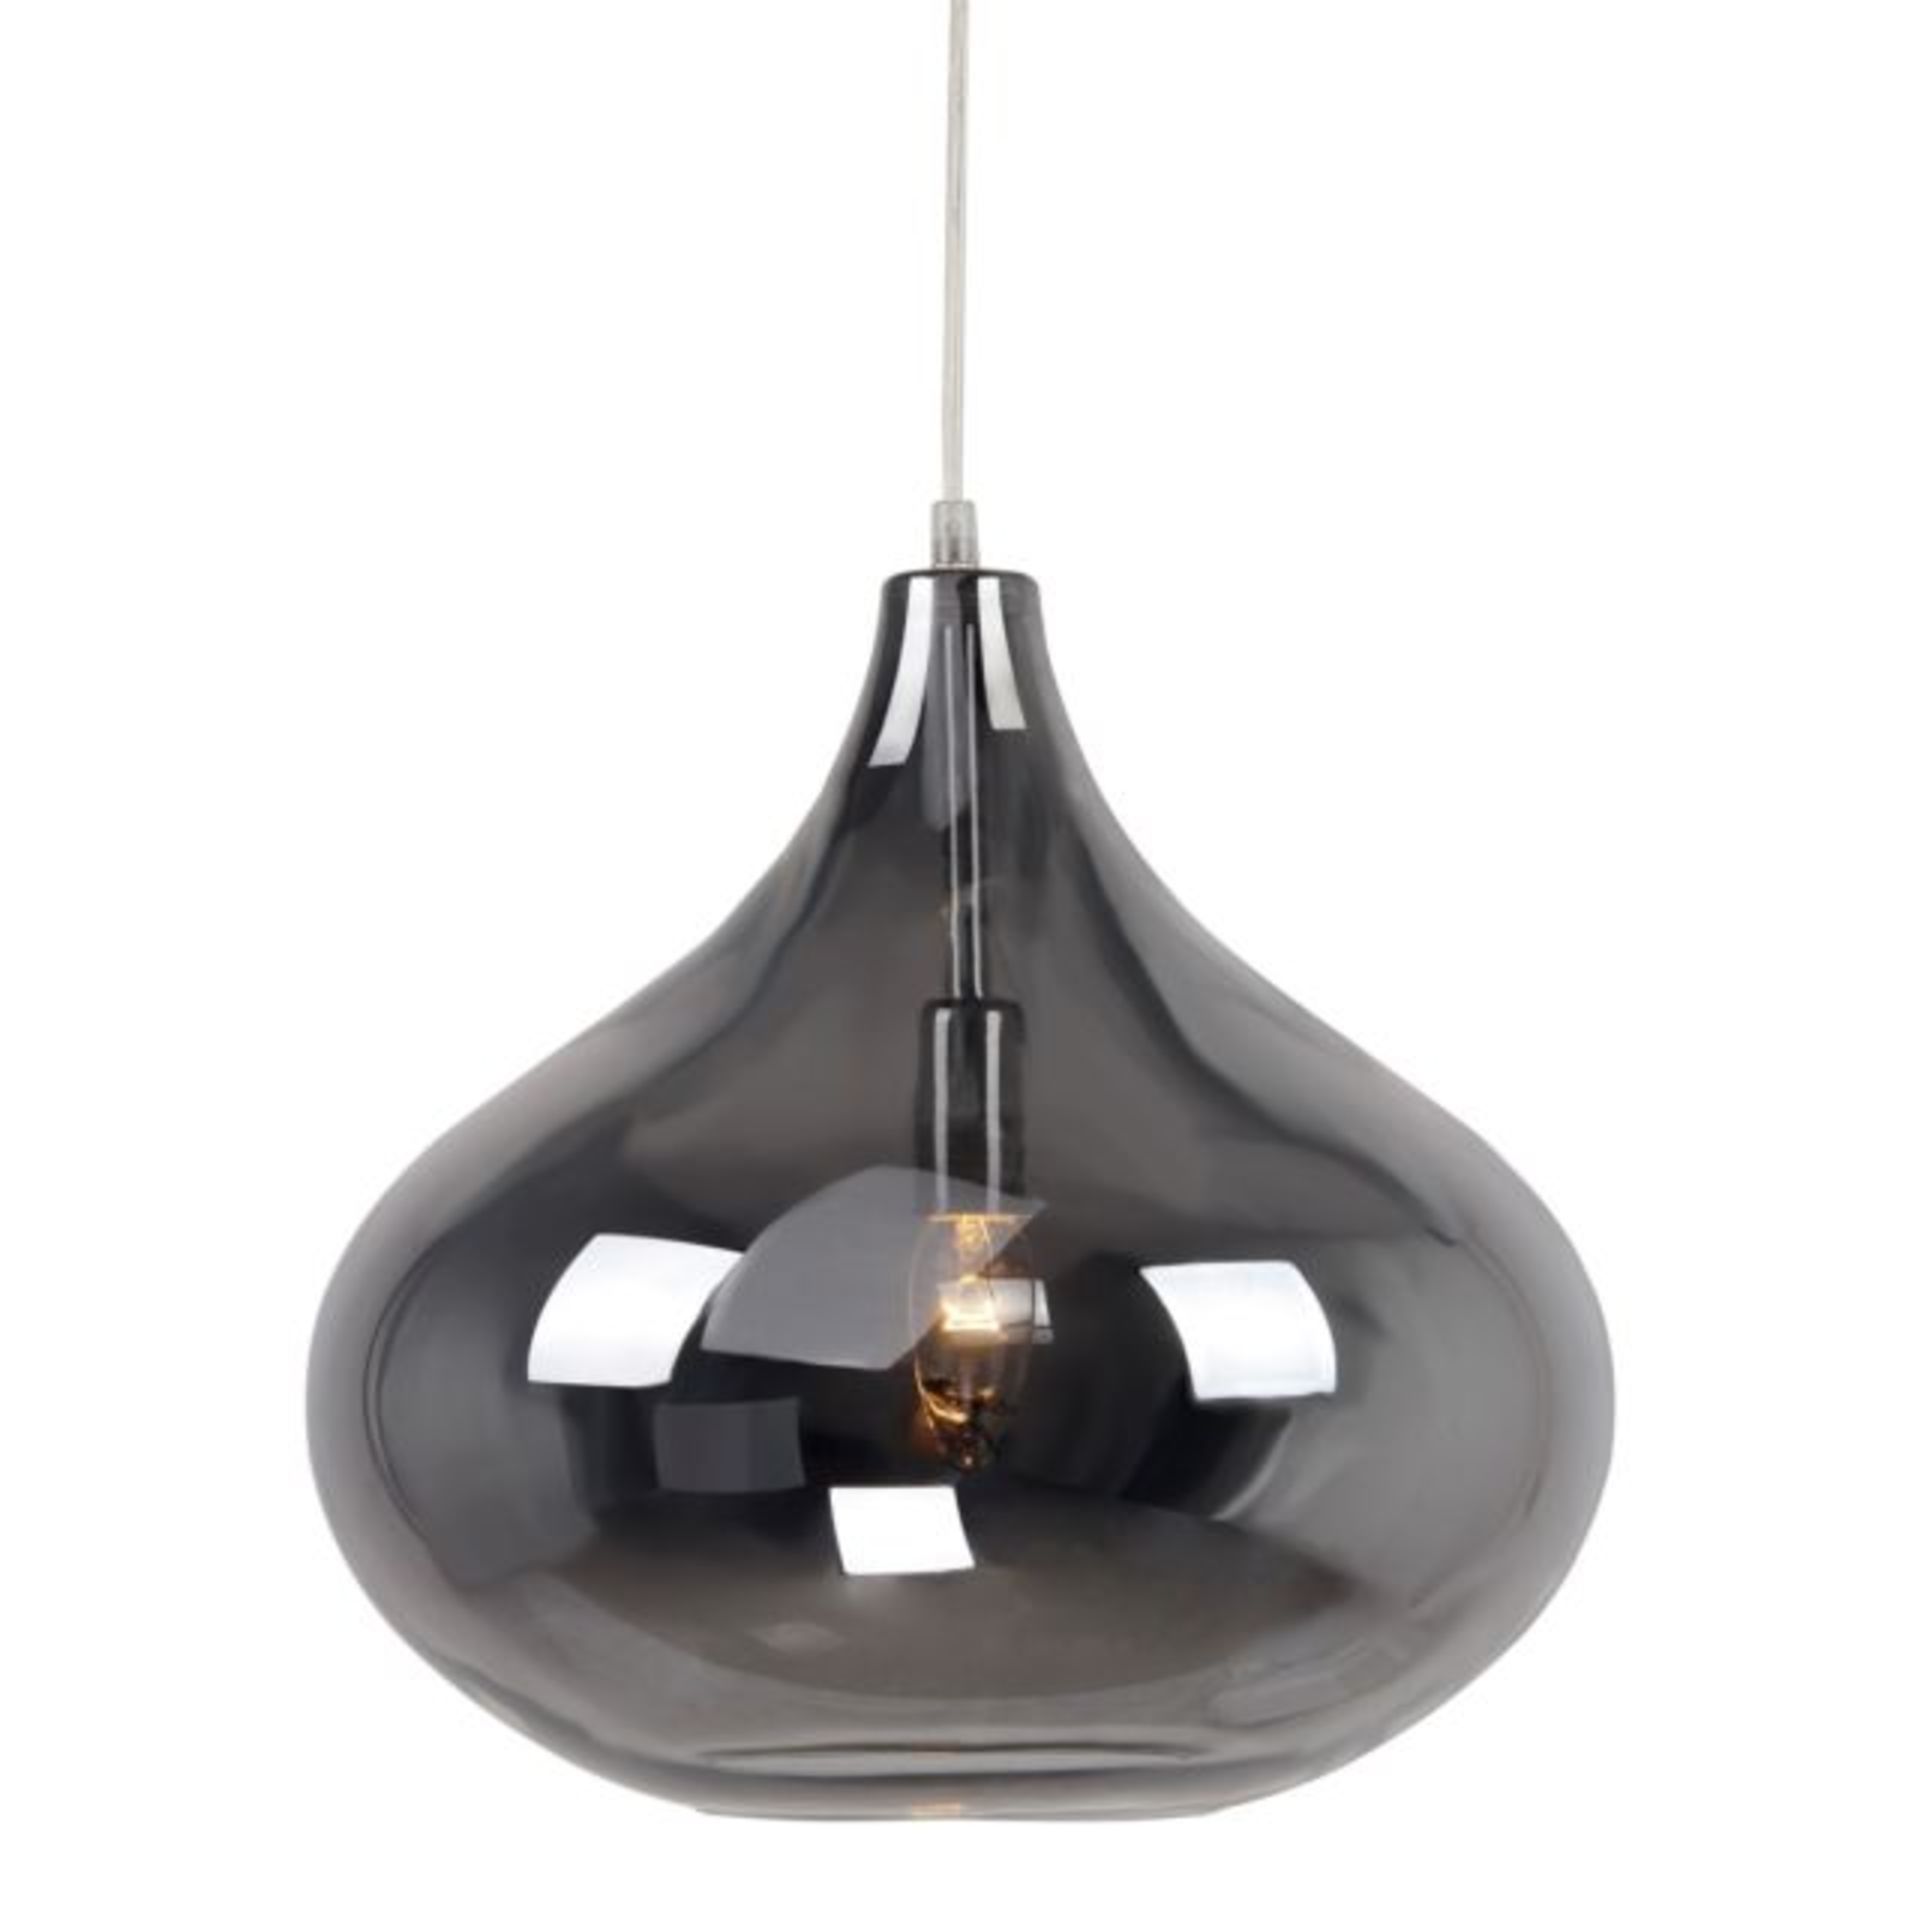 Boxed Home Collection Claire Ceiling Light Pendant RRP £80